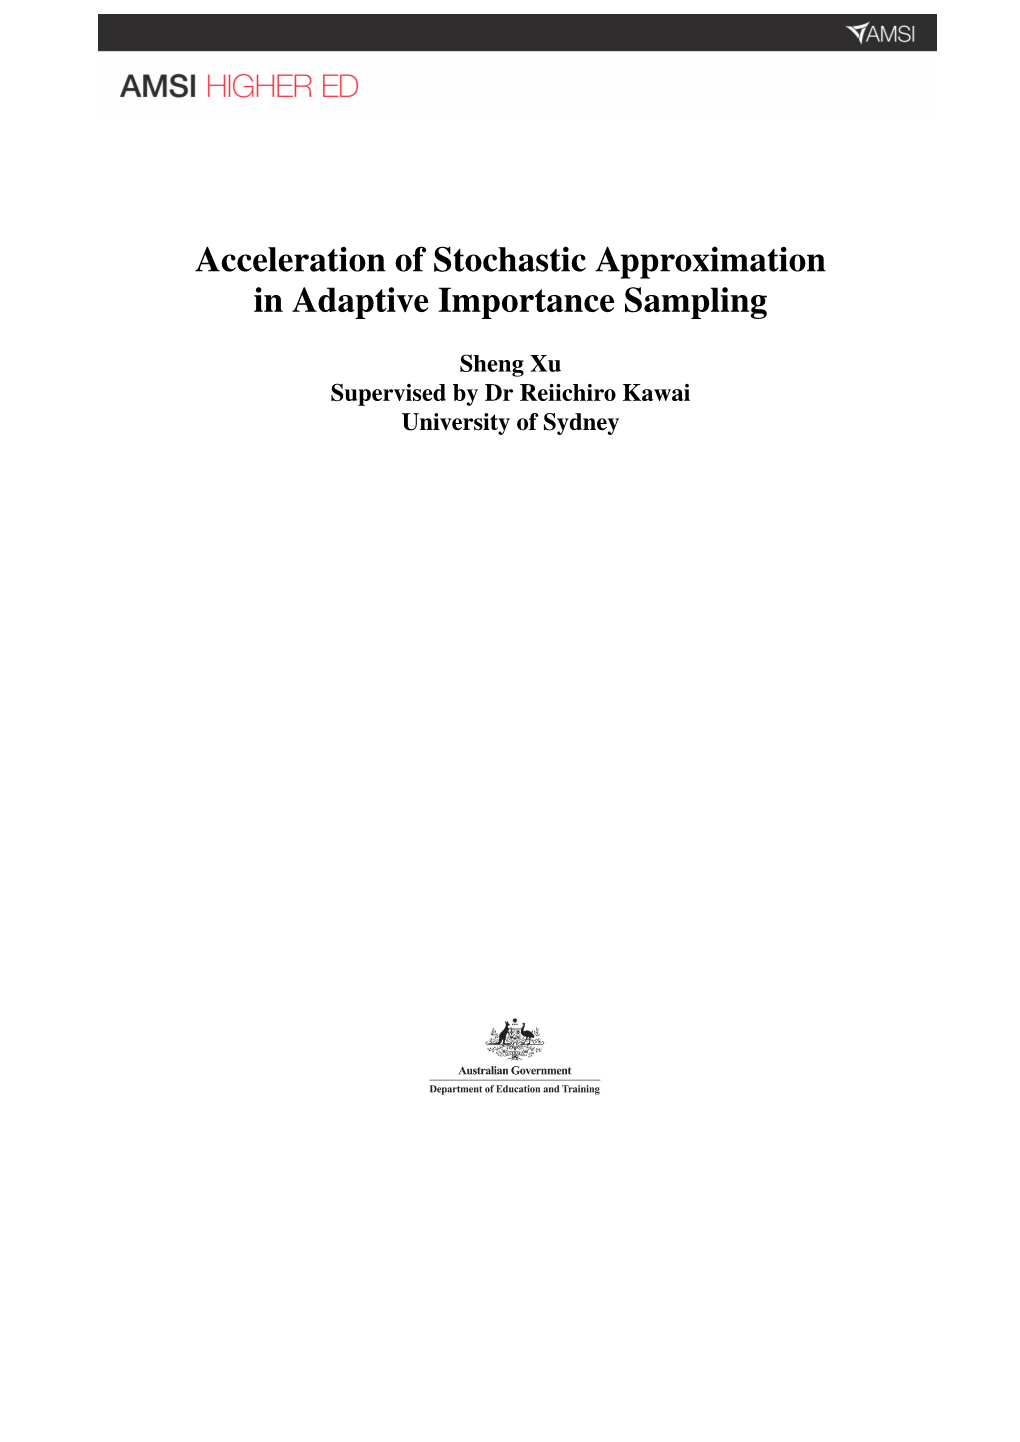 Acceleration of Stochastic Approximation in Adaptive Importance Sampling